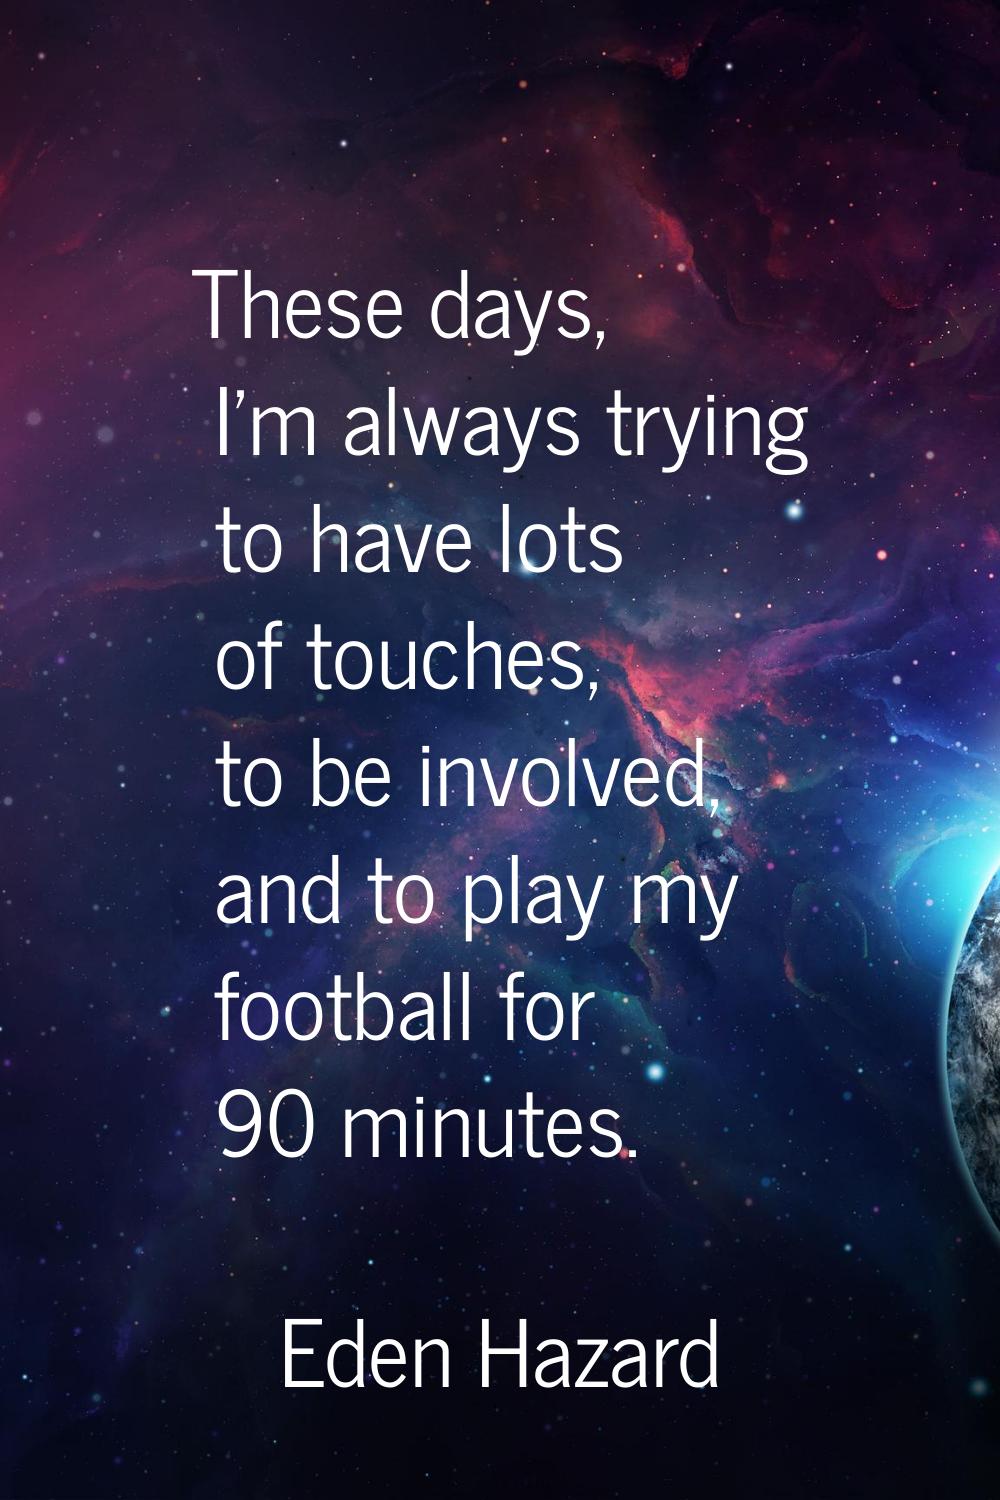 These days, I'm always trying to have lots of touches, to be involved, and to play my football for 